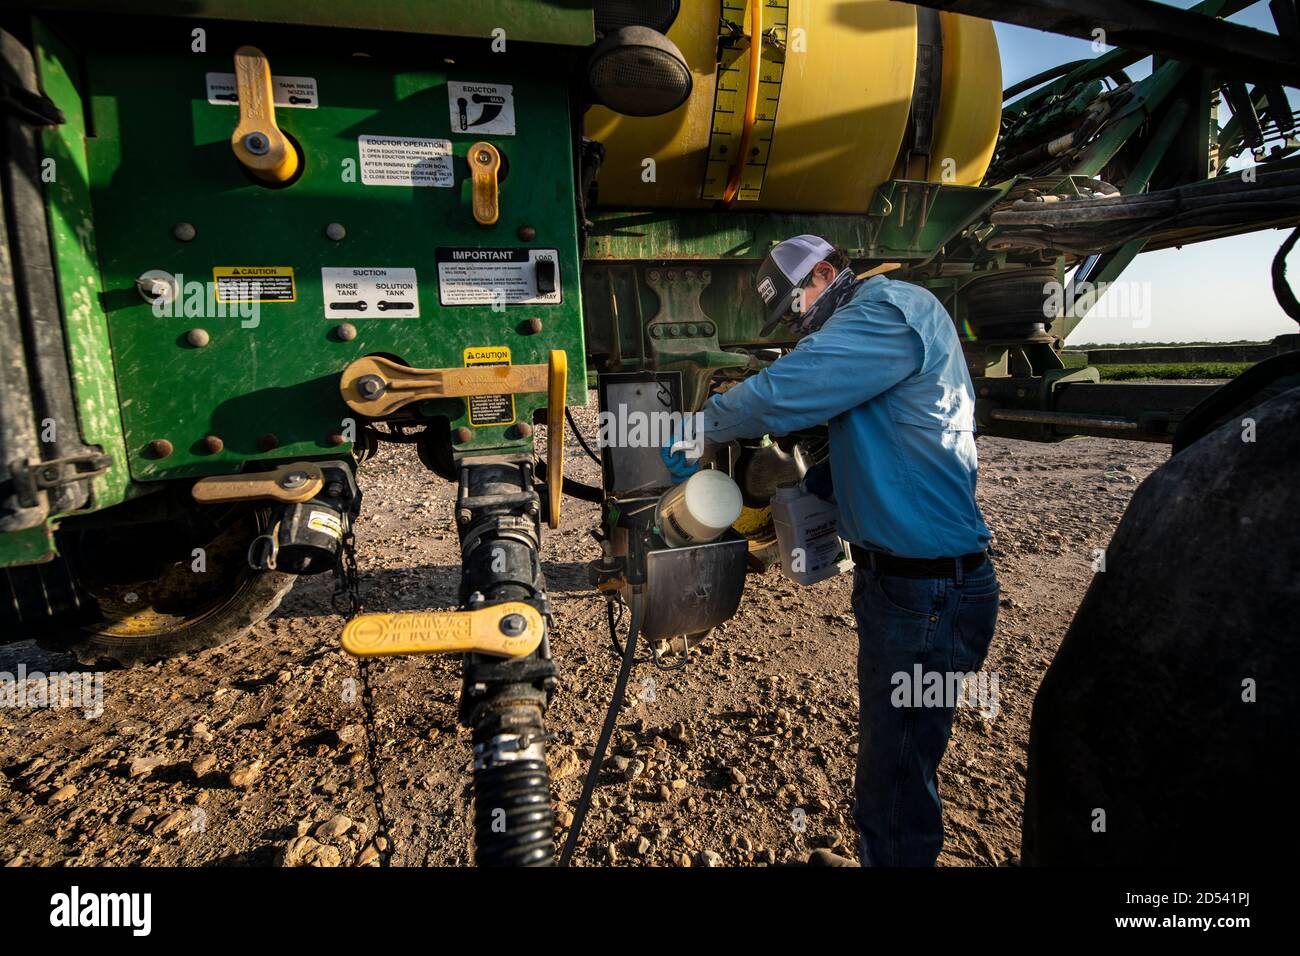 Operations Manager Brandon Schirmer loads defoliant chemicals into his sprayer to prepare a cotton field for harvest at his family farm August 12, 2020 in Batesville, Texas. Stock Photo